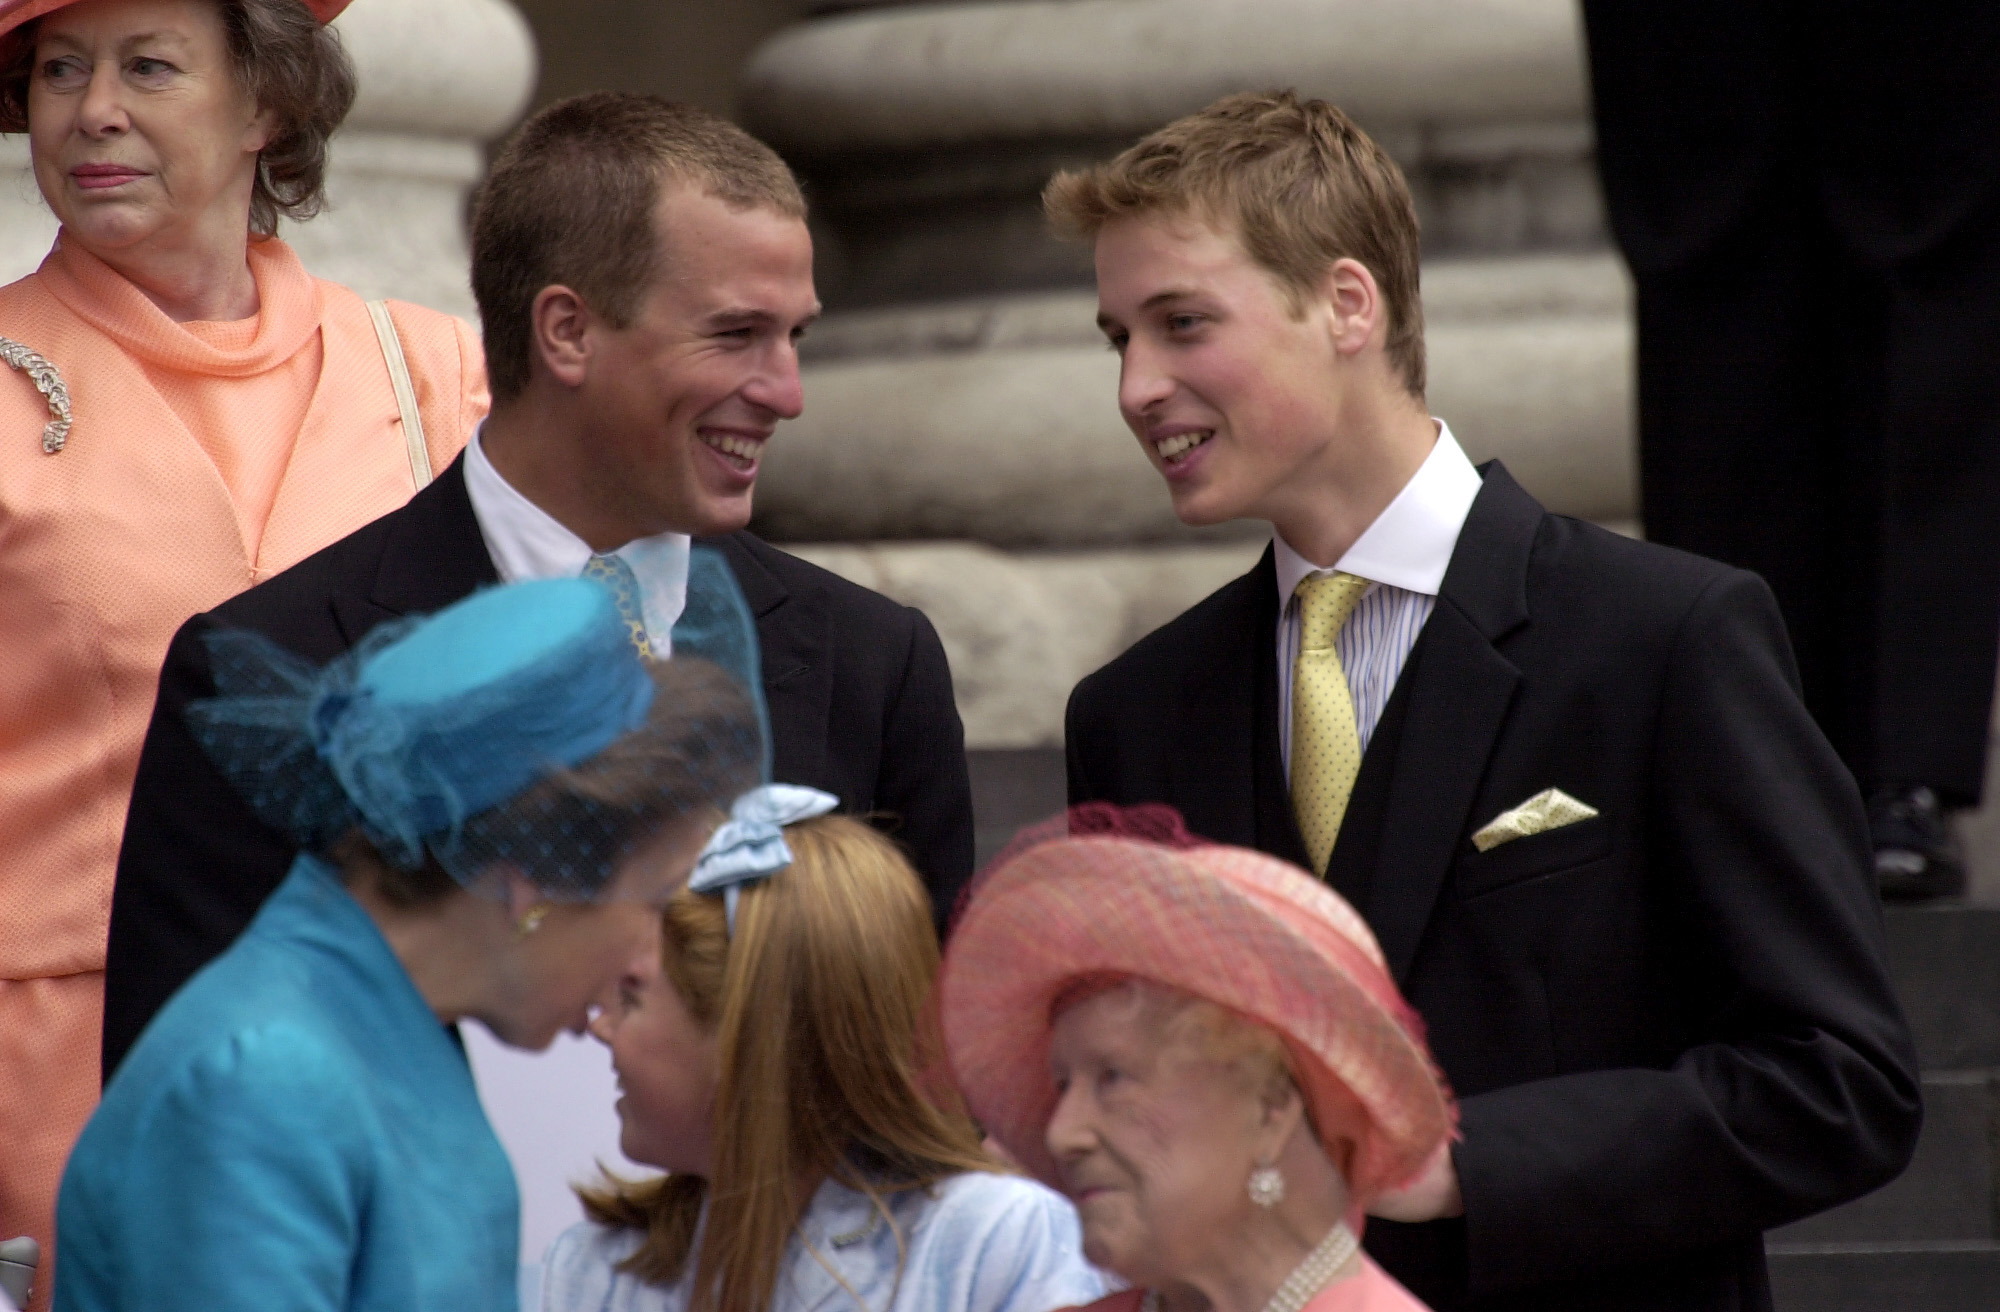 Prince William and Cousin Peter Phillips Relationship Through the Years